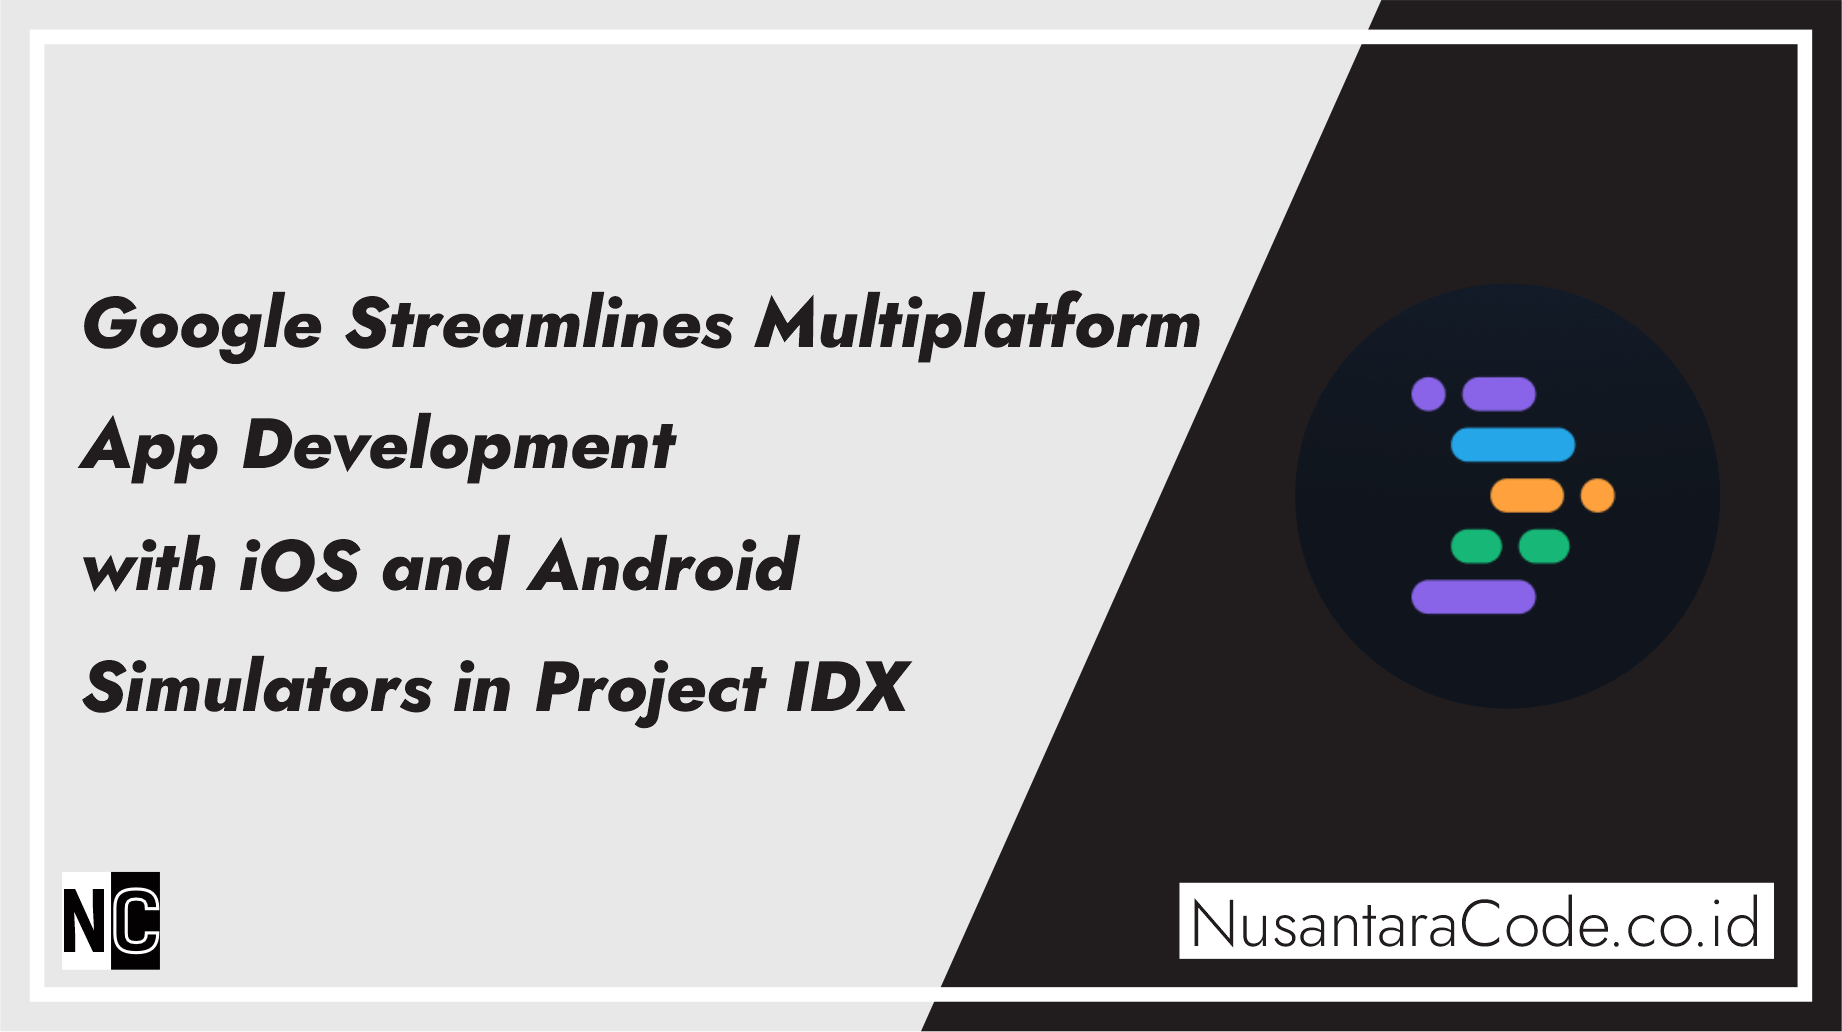 Google Streamlines Multiplatform App Development with iOS and Android Simulators in Project IDX